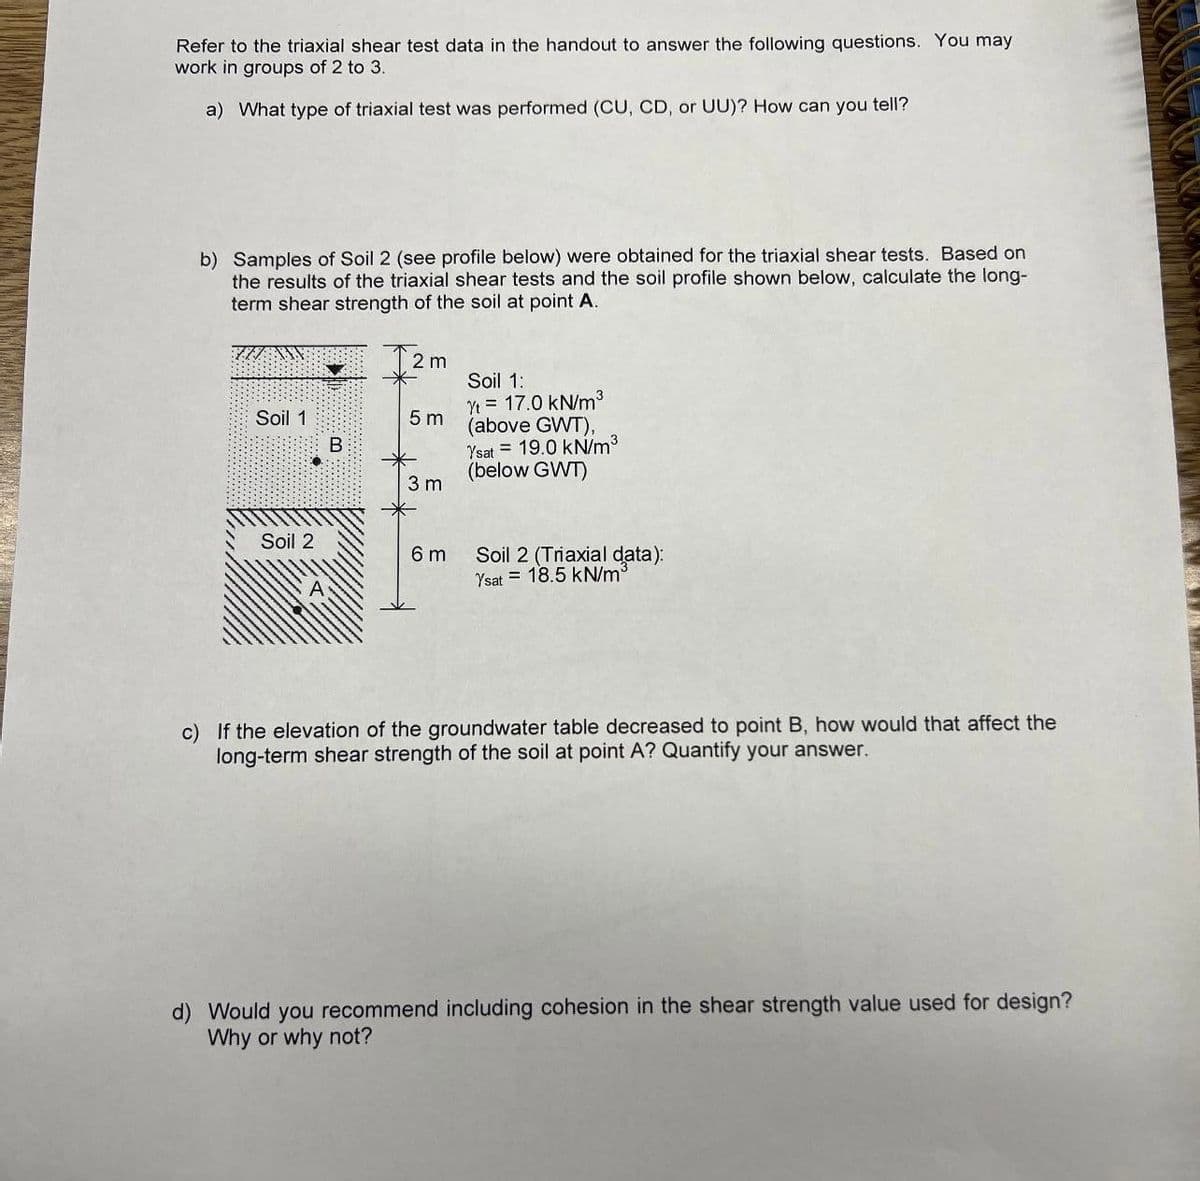 Refer to the triaxial shear test data in the handout to answer the following questions. You may
work in groups of 2 to 3.
a) What type of triaxial test was performed (CU, CD, or UU)? How can you tell?
b) Samples of Soil 2 (see profile below) were obtained for the triaxial shear tests. Based on
the results of the triaxial shear tests and the soil profile shown below, calculate the long-
term shear strength of the soil at point A.
2 m
Soil 1:
Yt = 17.0 kN/m3
5 m
(above GWT),
Soil 1
Ysat = 19.0 kN/m3
(below GWT)
3 m
Soil 2
6 m
Soil 2 (Triaxial data):
Ysat = 18.5 kN/m3
c) If the elevation of the groundwater table decreased to point B, how would that affect the
long-term shear strength of the soil at point A? Quantify your answer.
d) Would you recommend including cohesion in the shear strength value used for design?
Why or why not?
